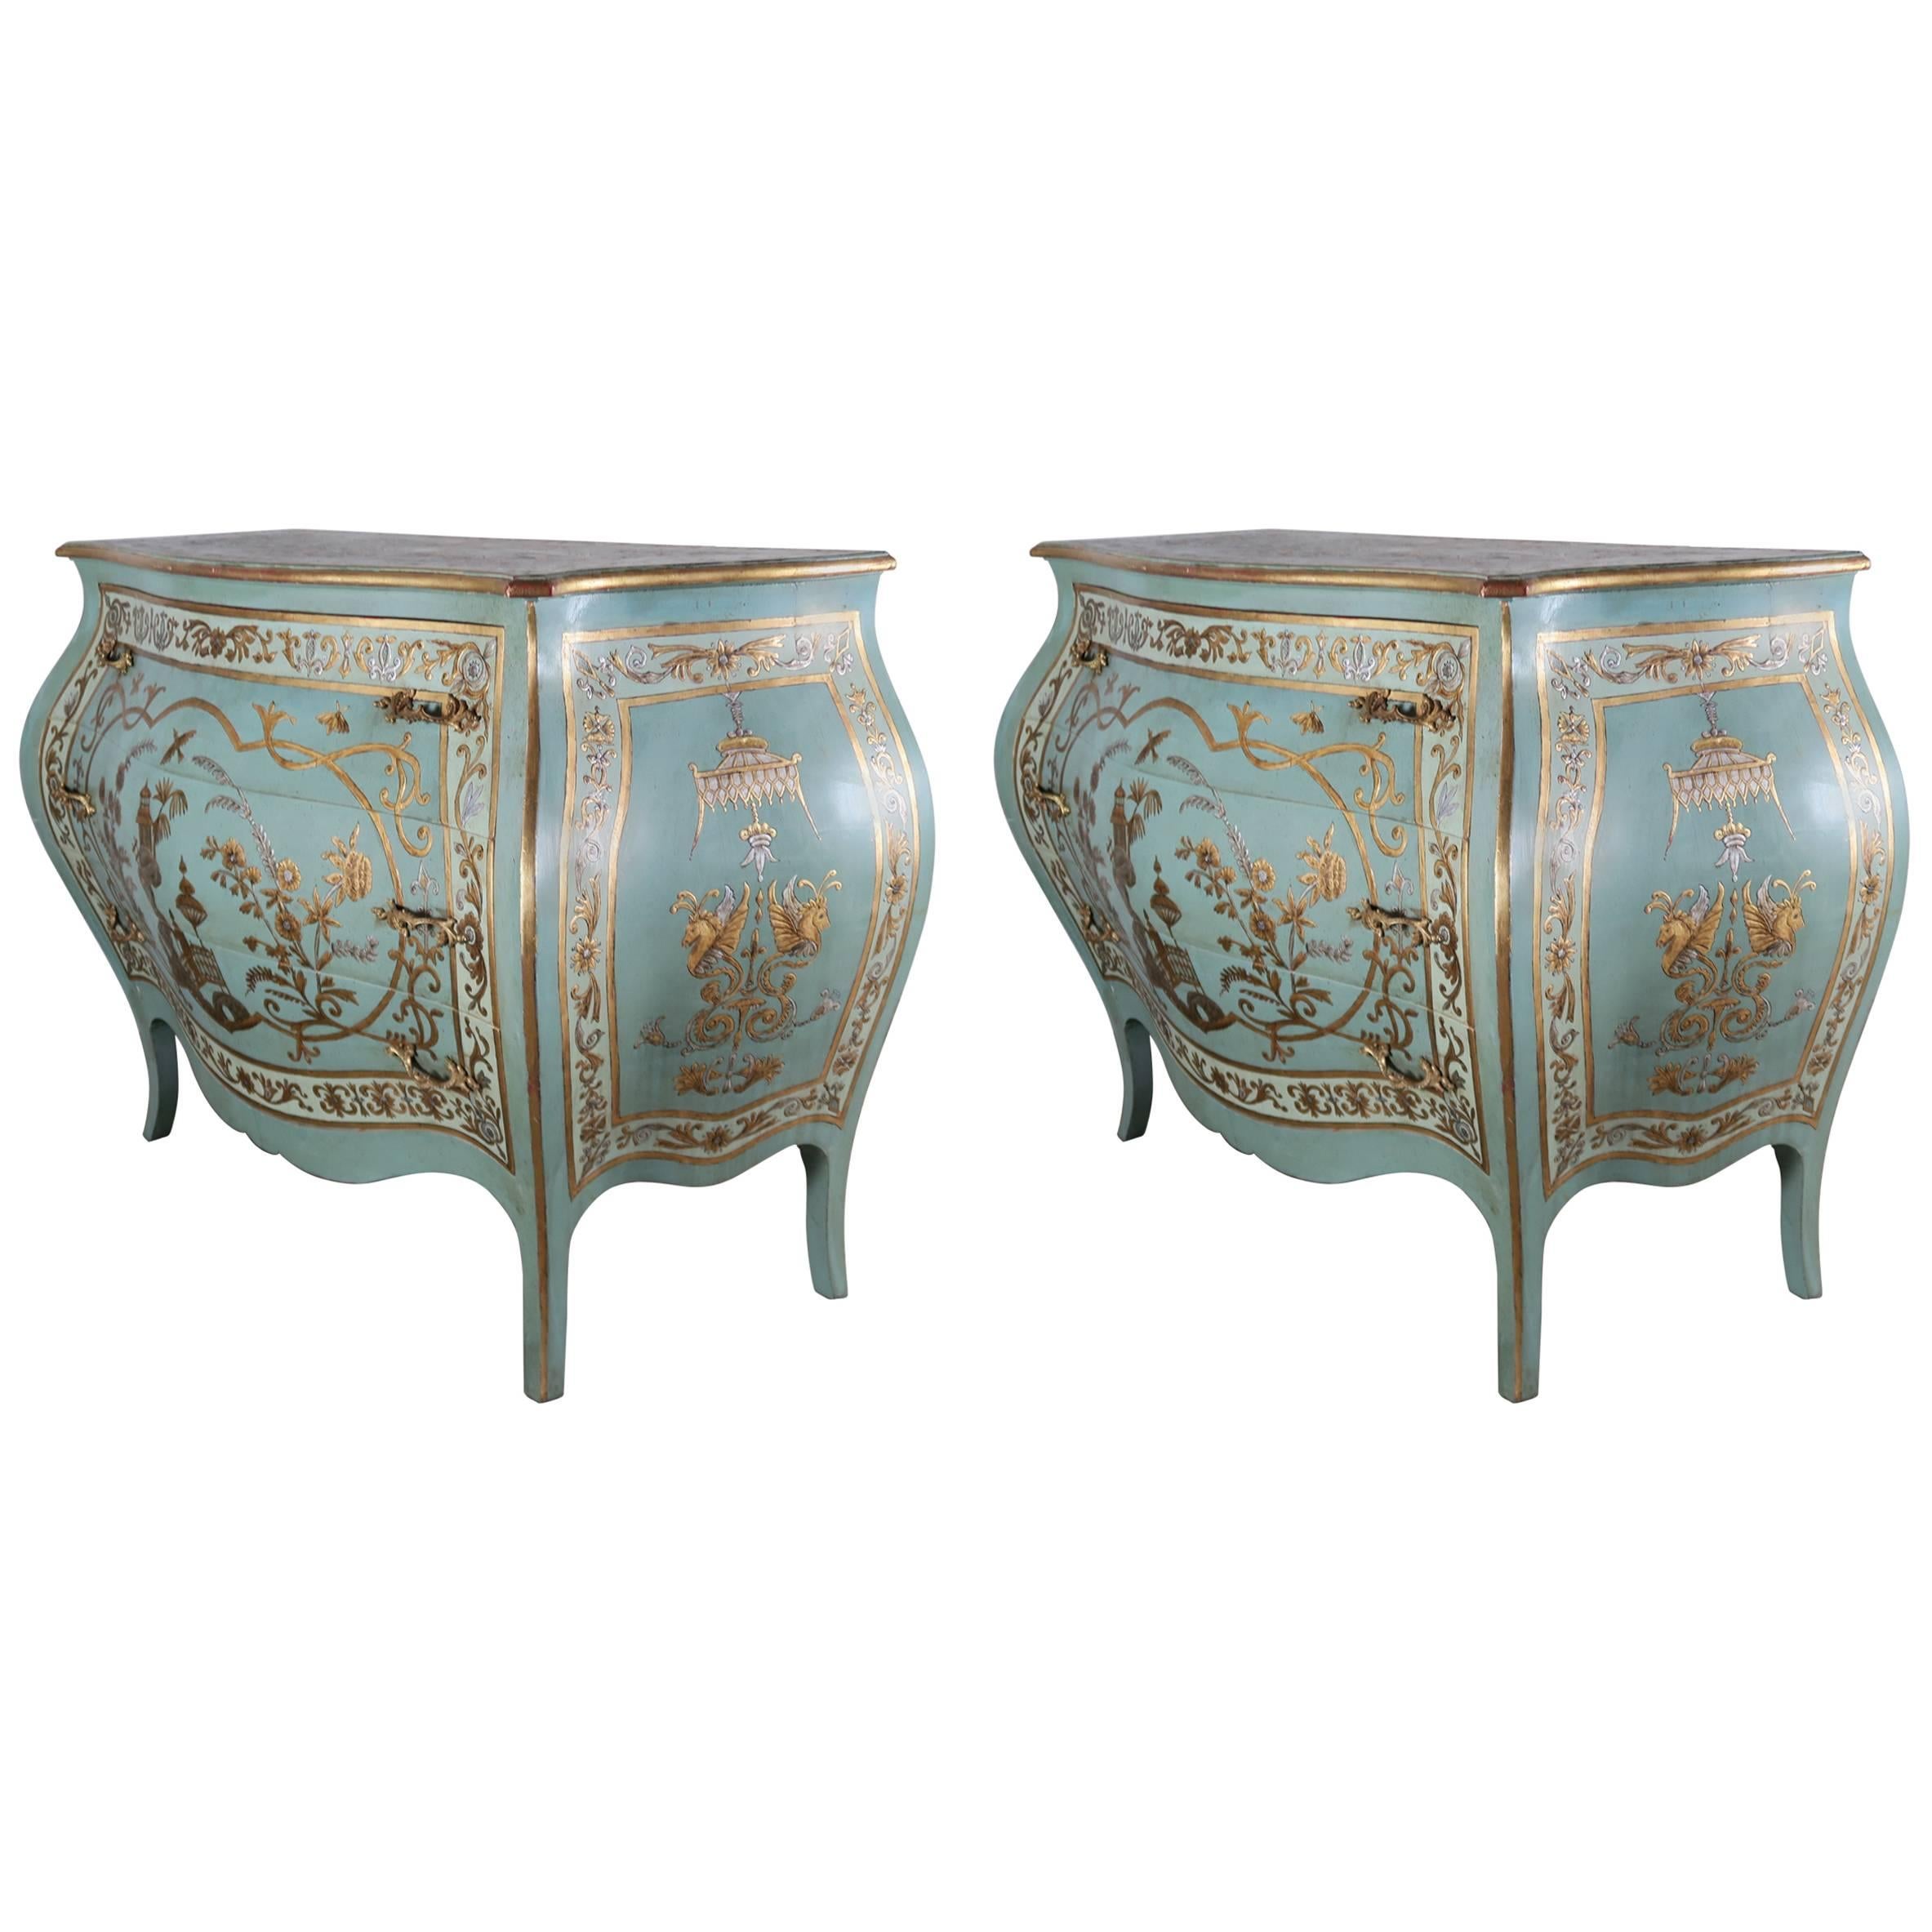 Pair of circa mid 20th century French blue painted serpentine shaped bombe commodes finely decorated in hand-painted raised gold and silver chinoiserie design. Original brass hardware.